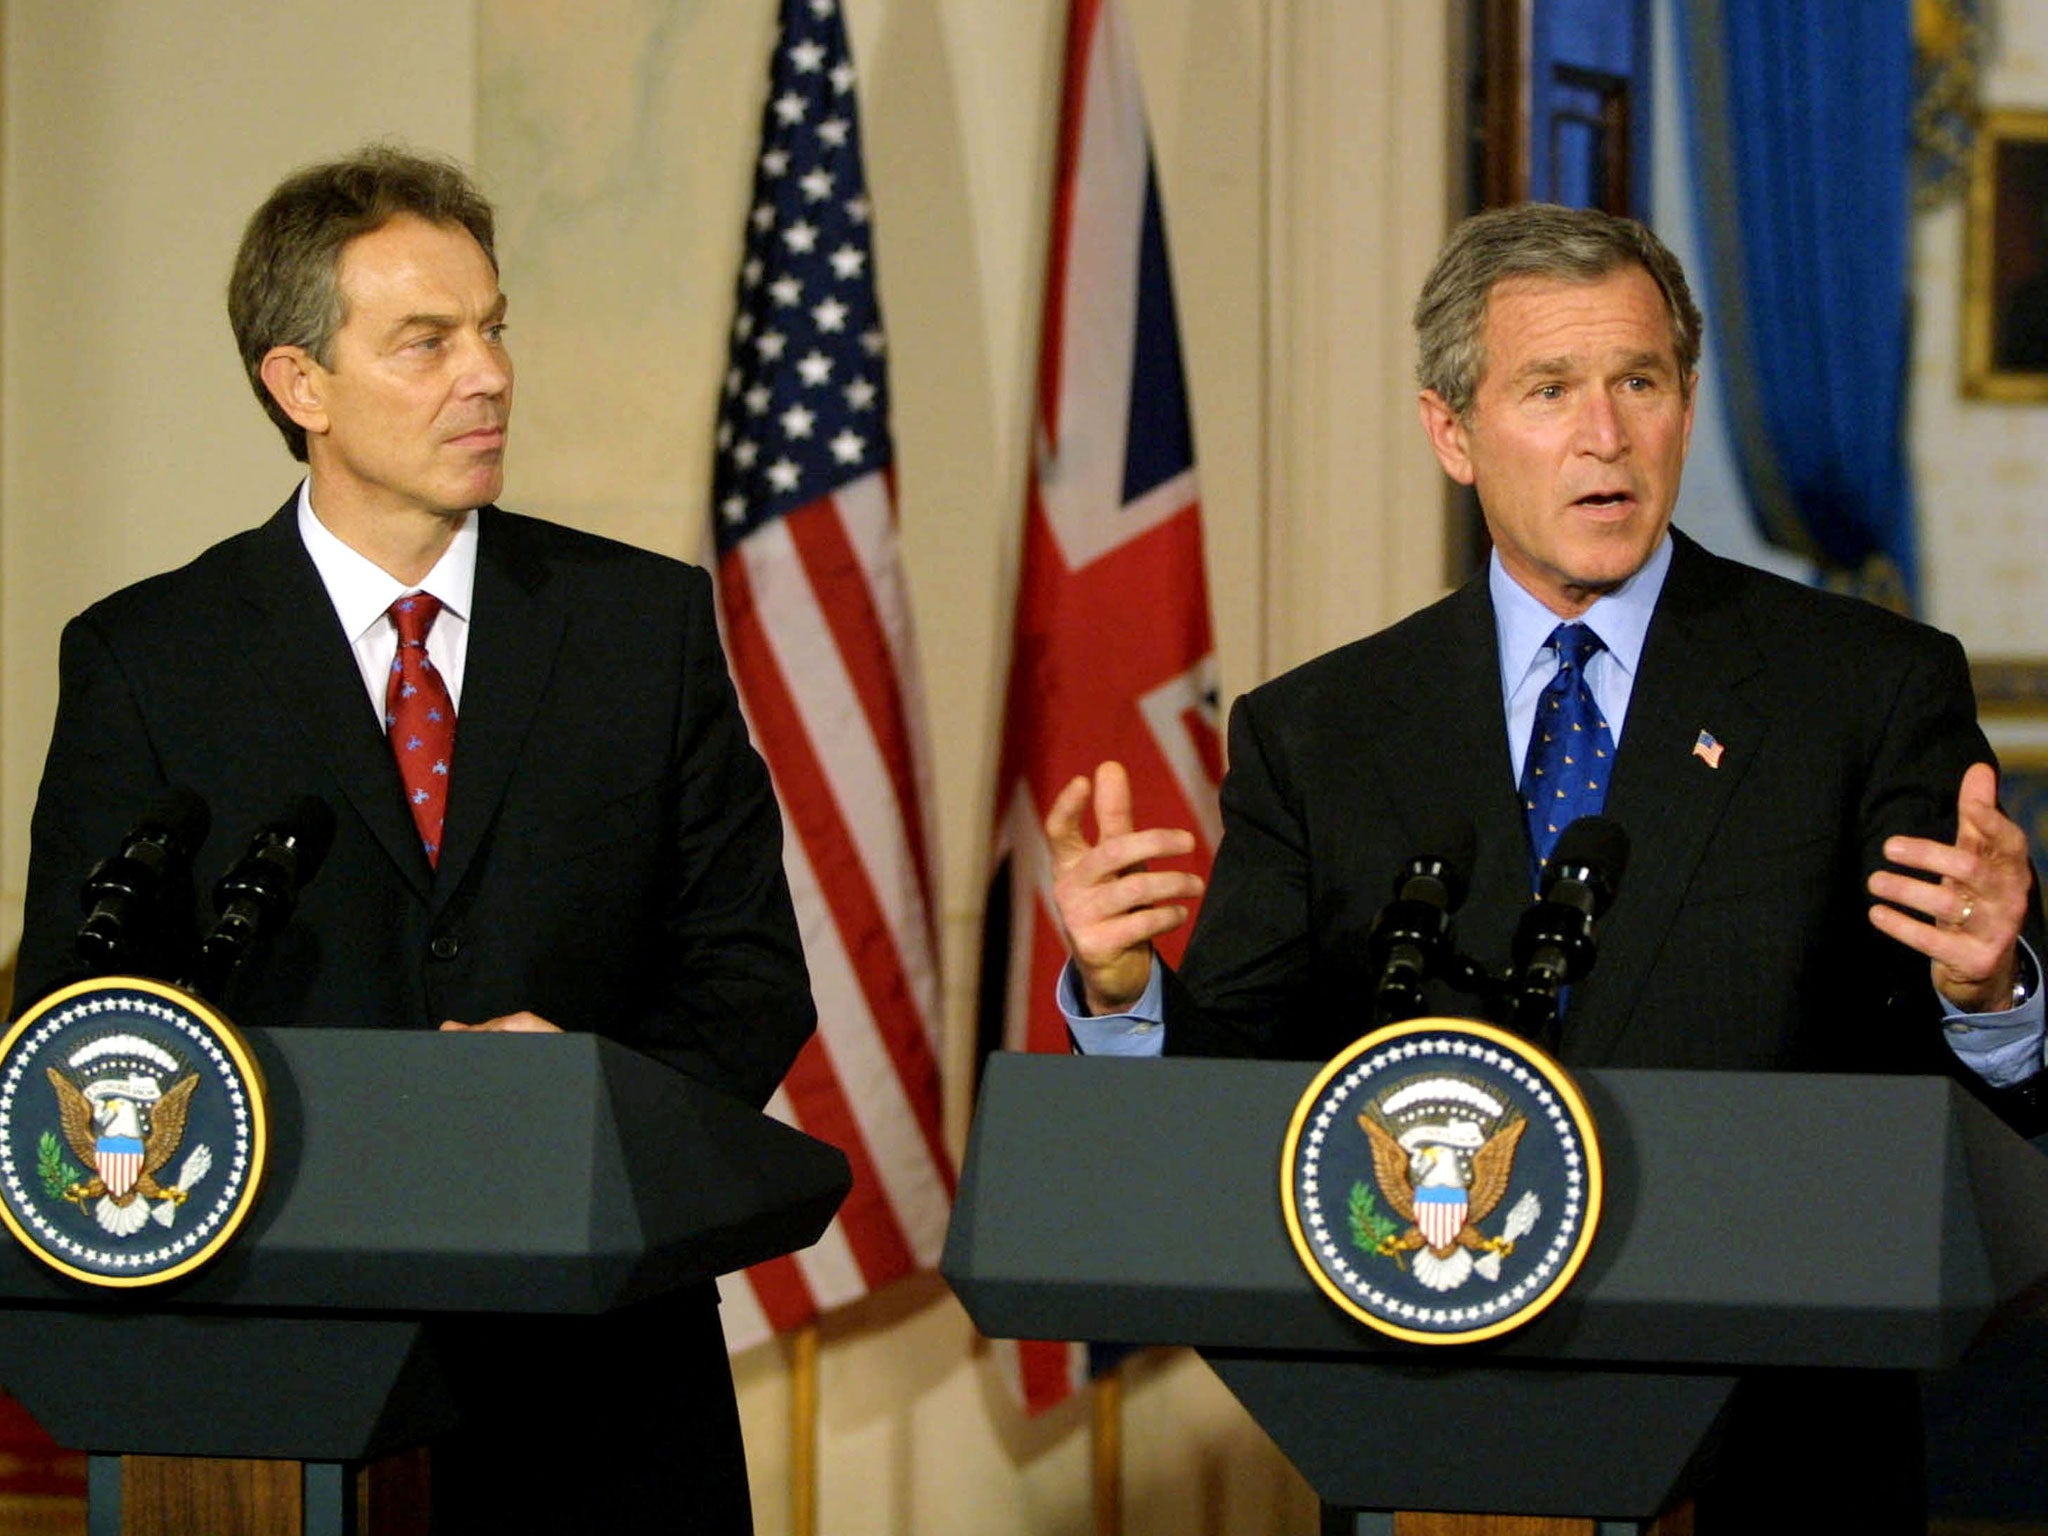 Vital intelligence used by Tony Blair and George W Bush to justify the invasion of Iraq was based on ‘fabrication’